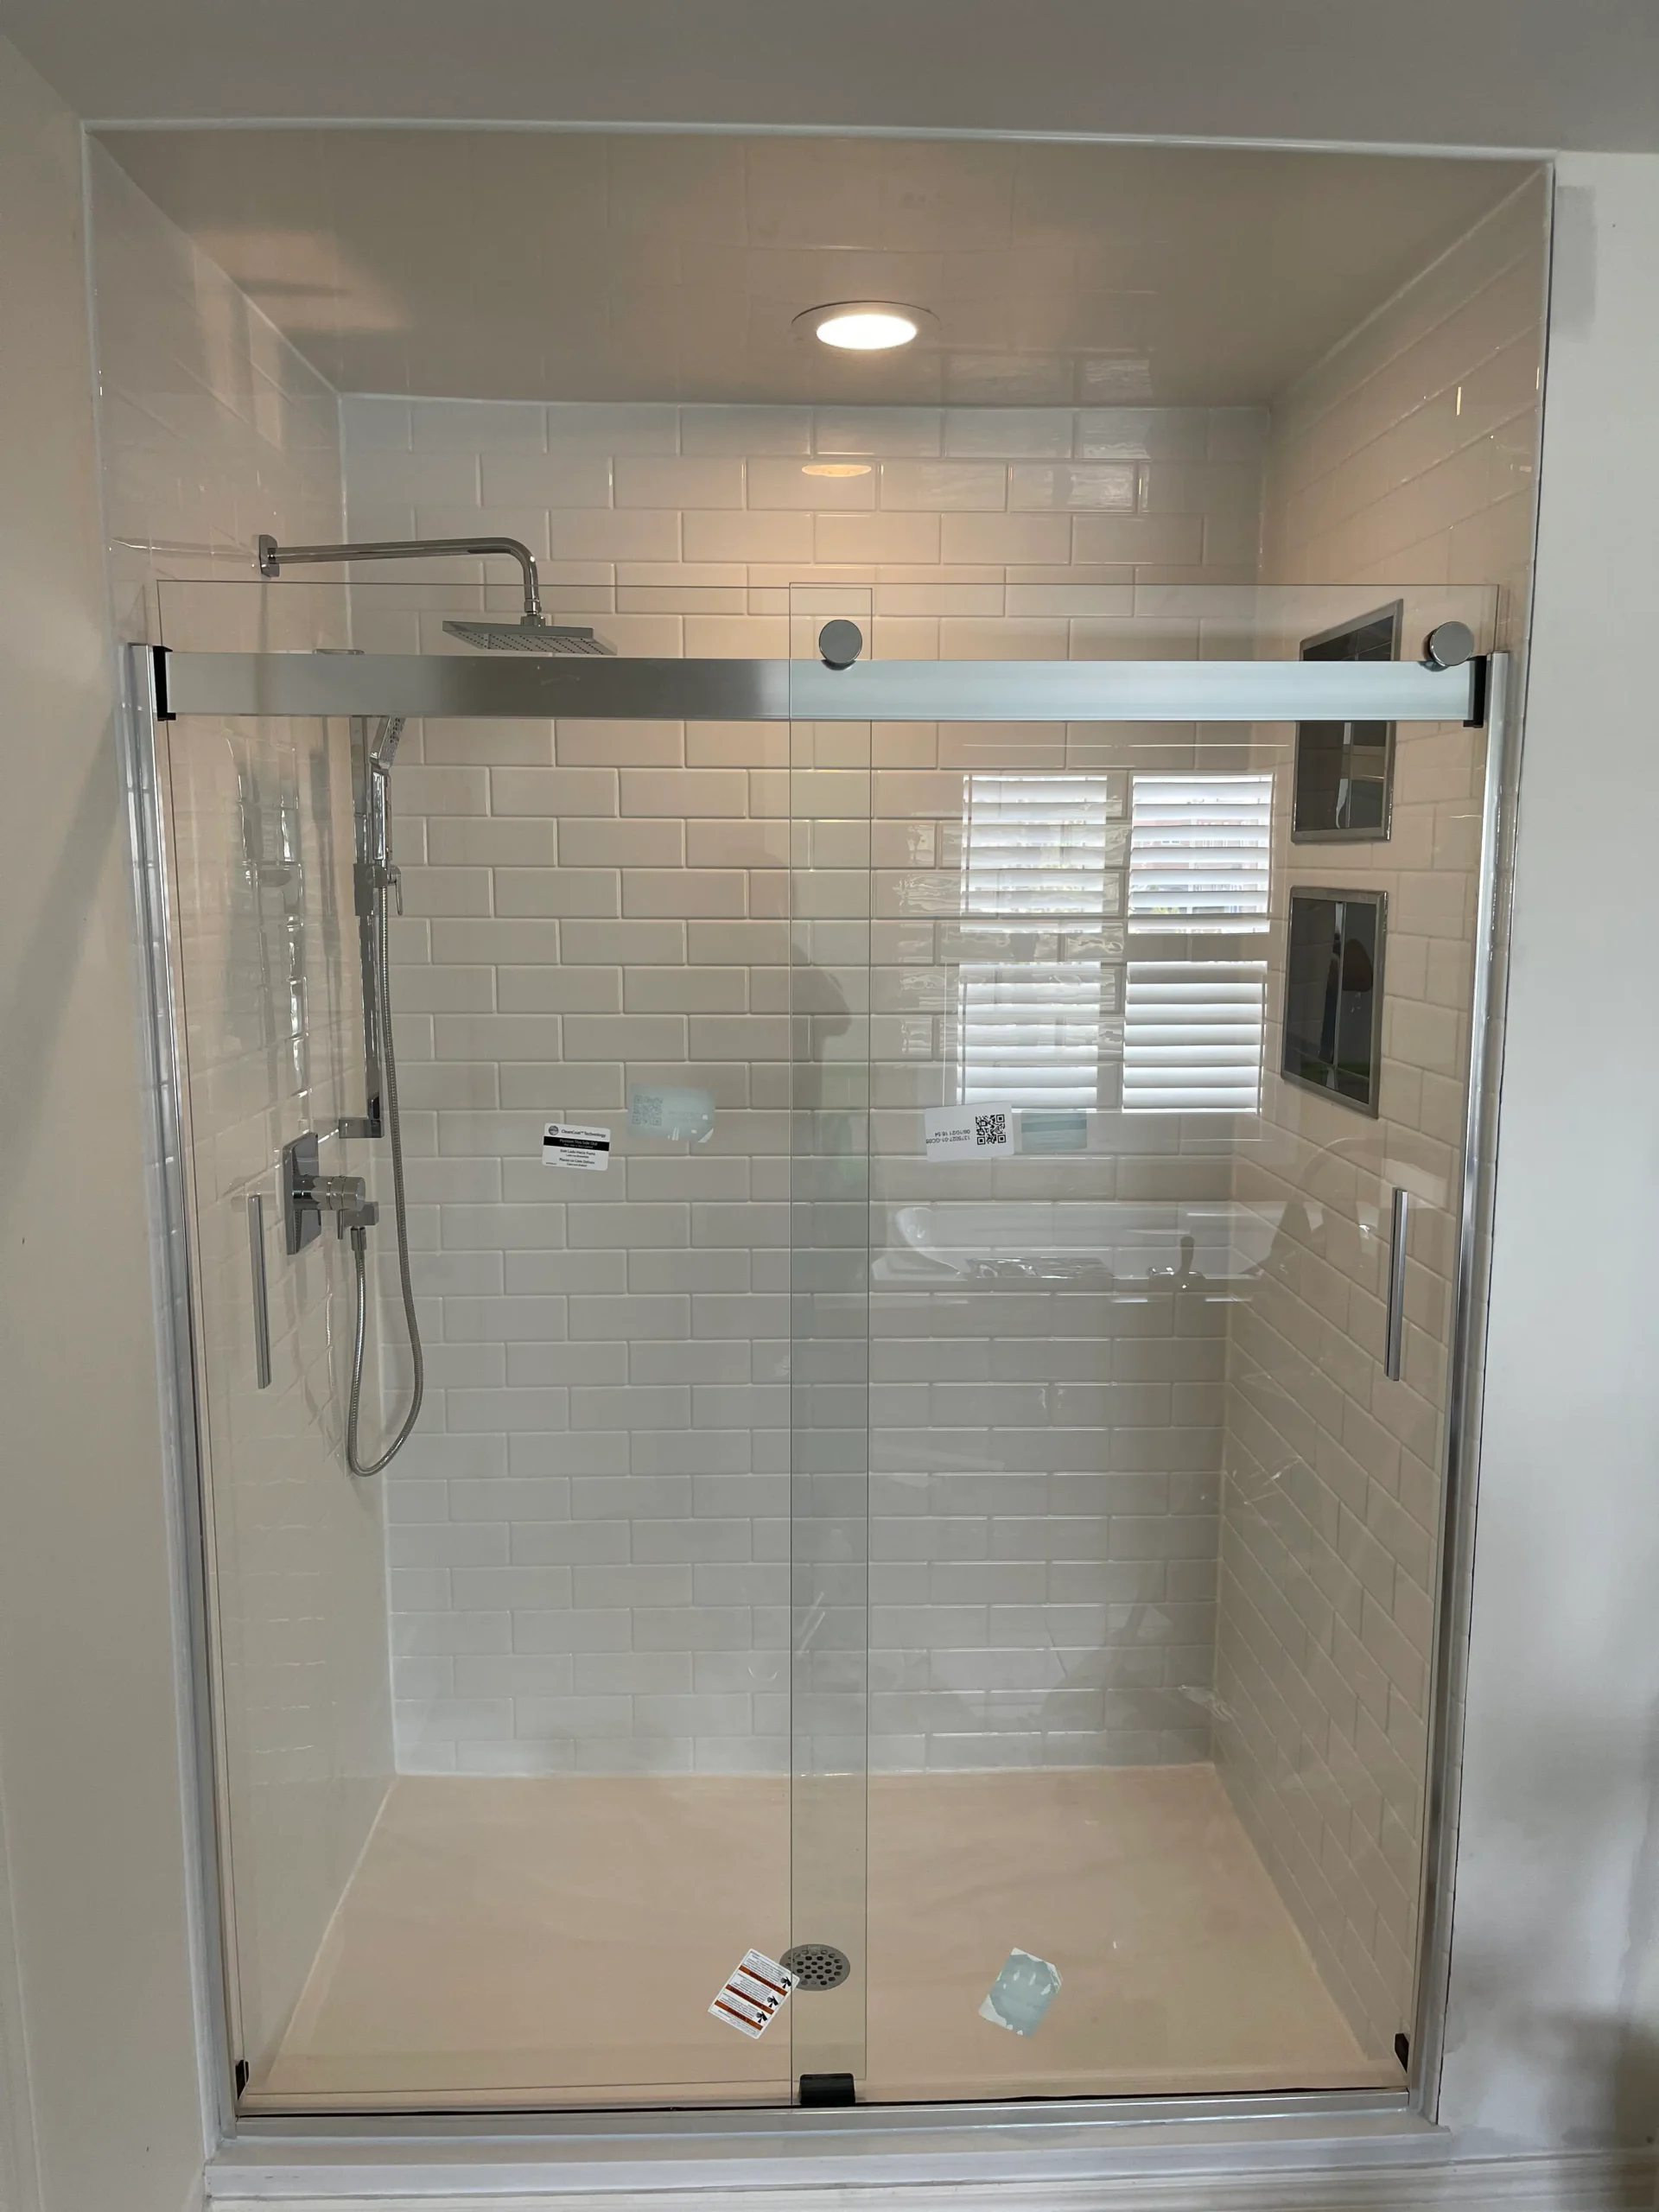 an image about A glass shower door in a bathroom, featuring bathroom acrylic panels.